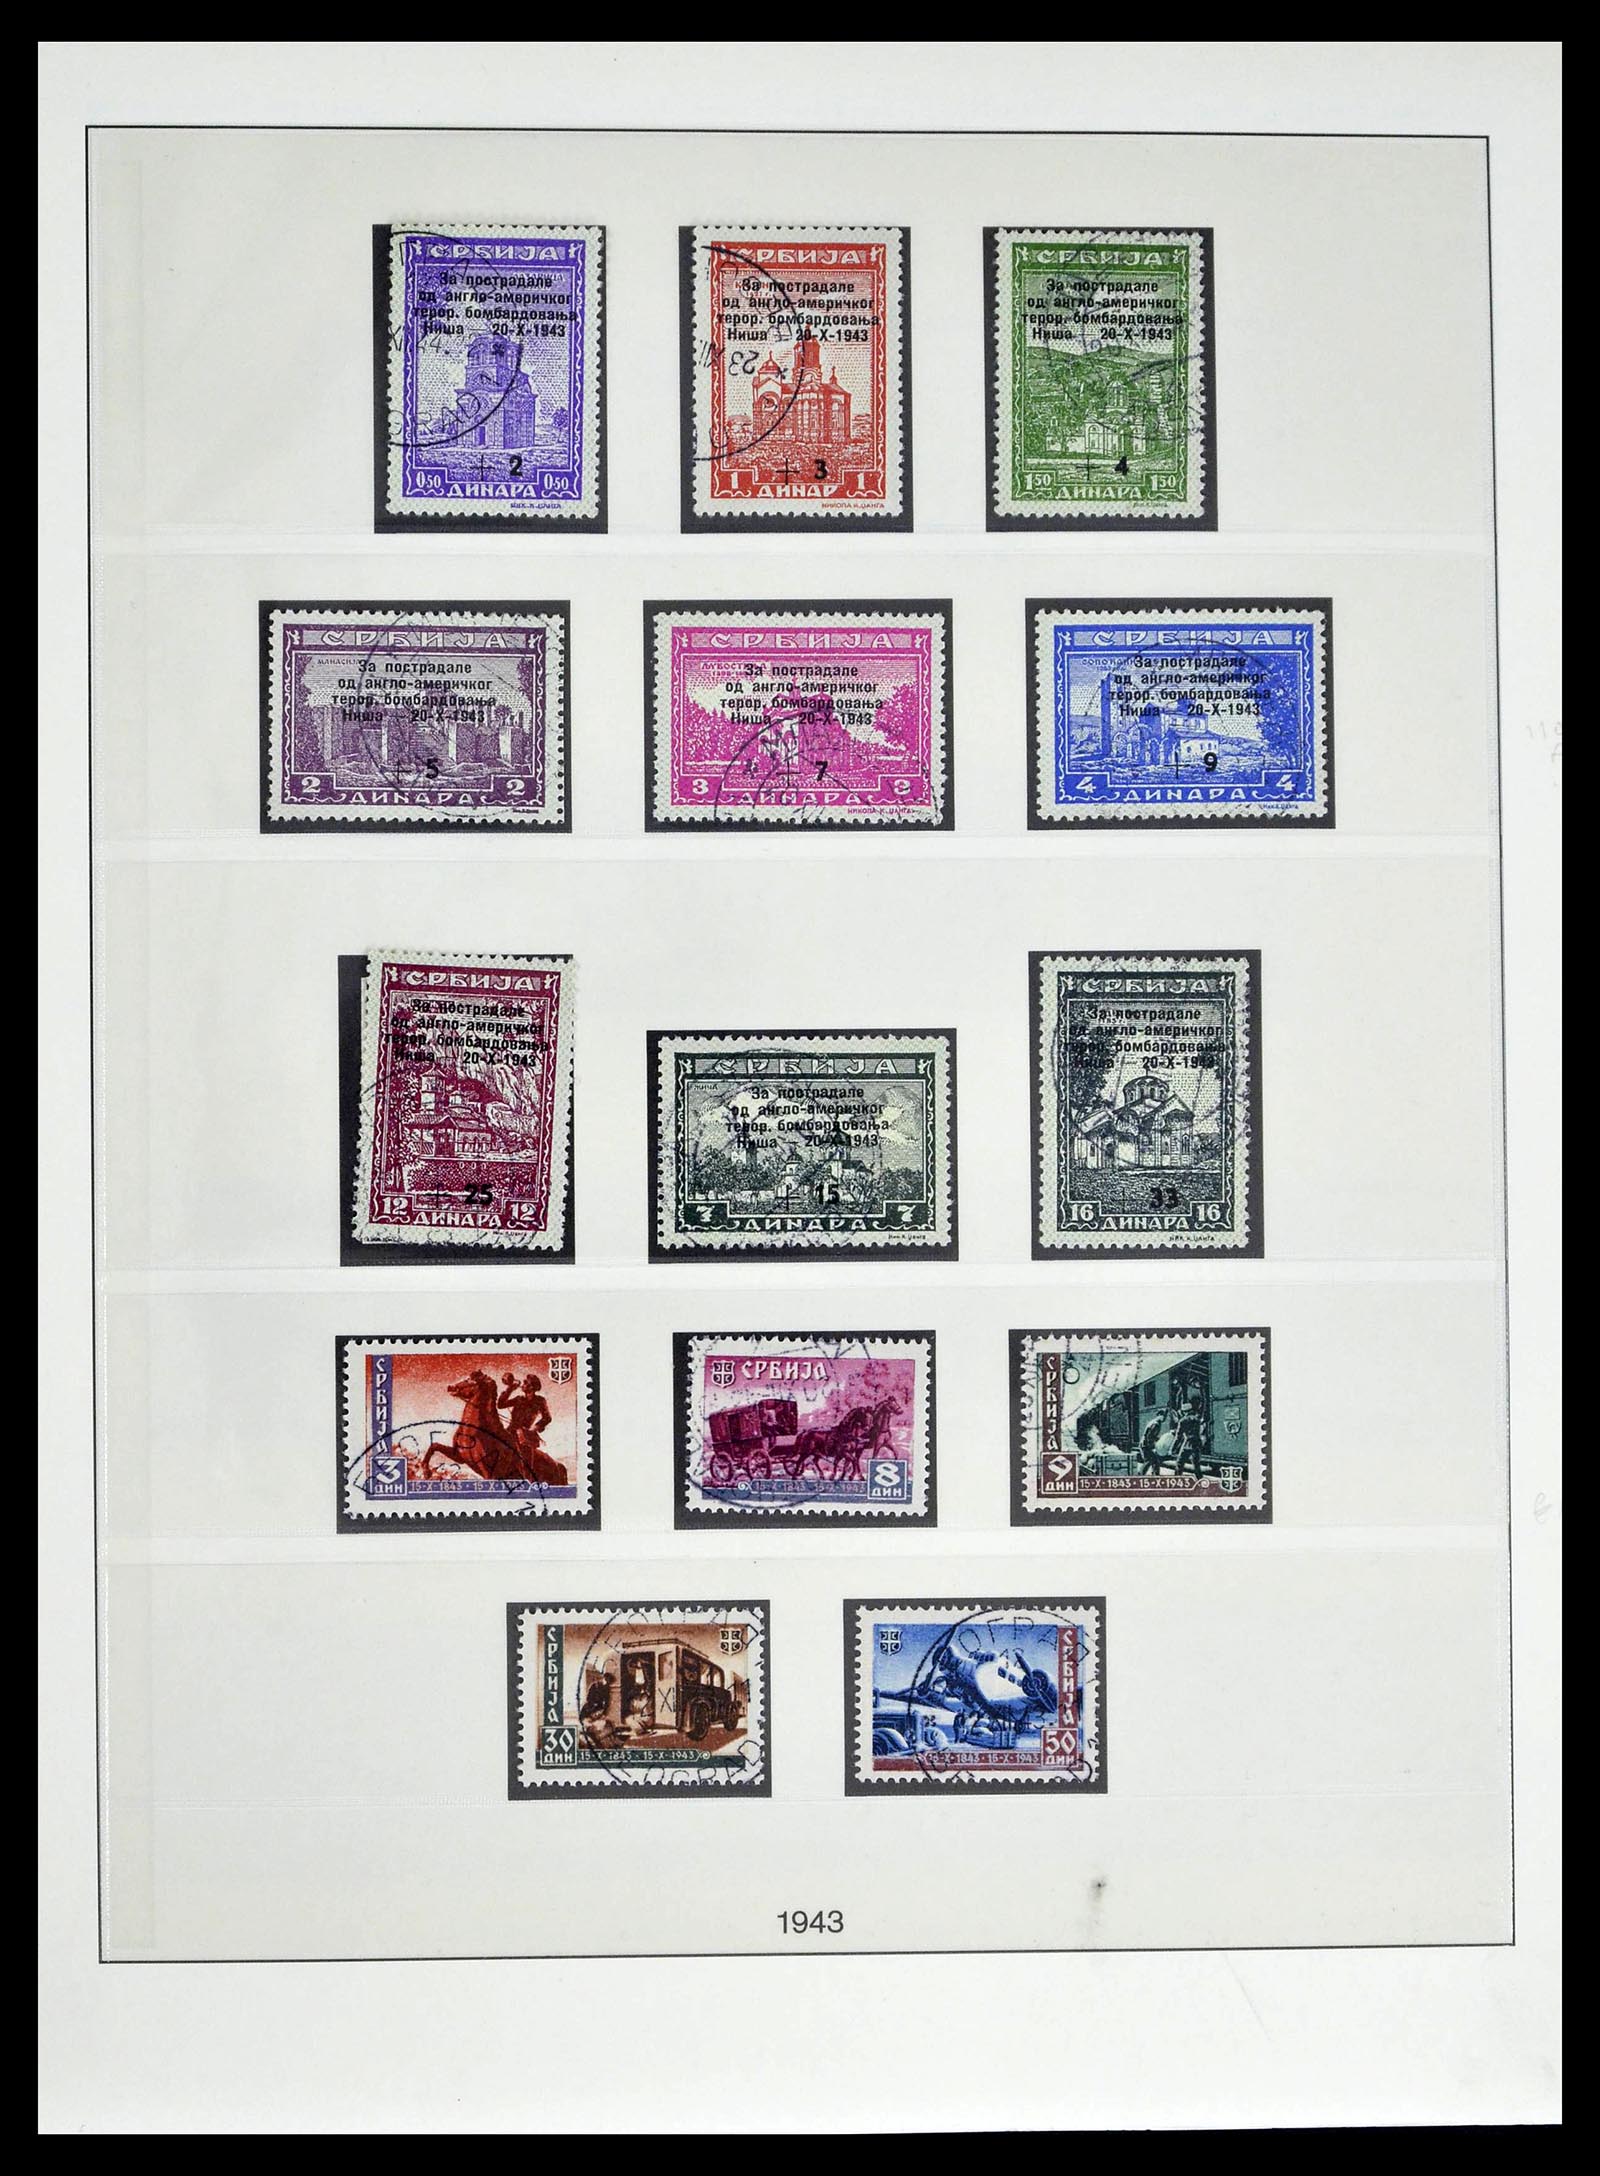 39396 0027 - Stamp collection 39396 German occupation WW II 1939-1945.